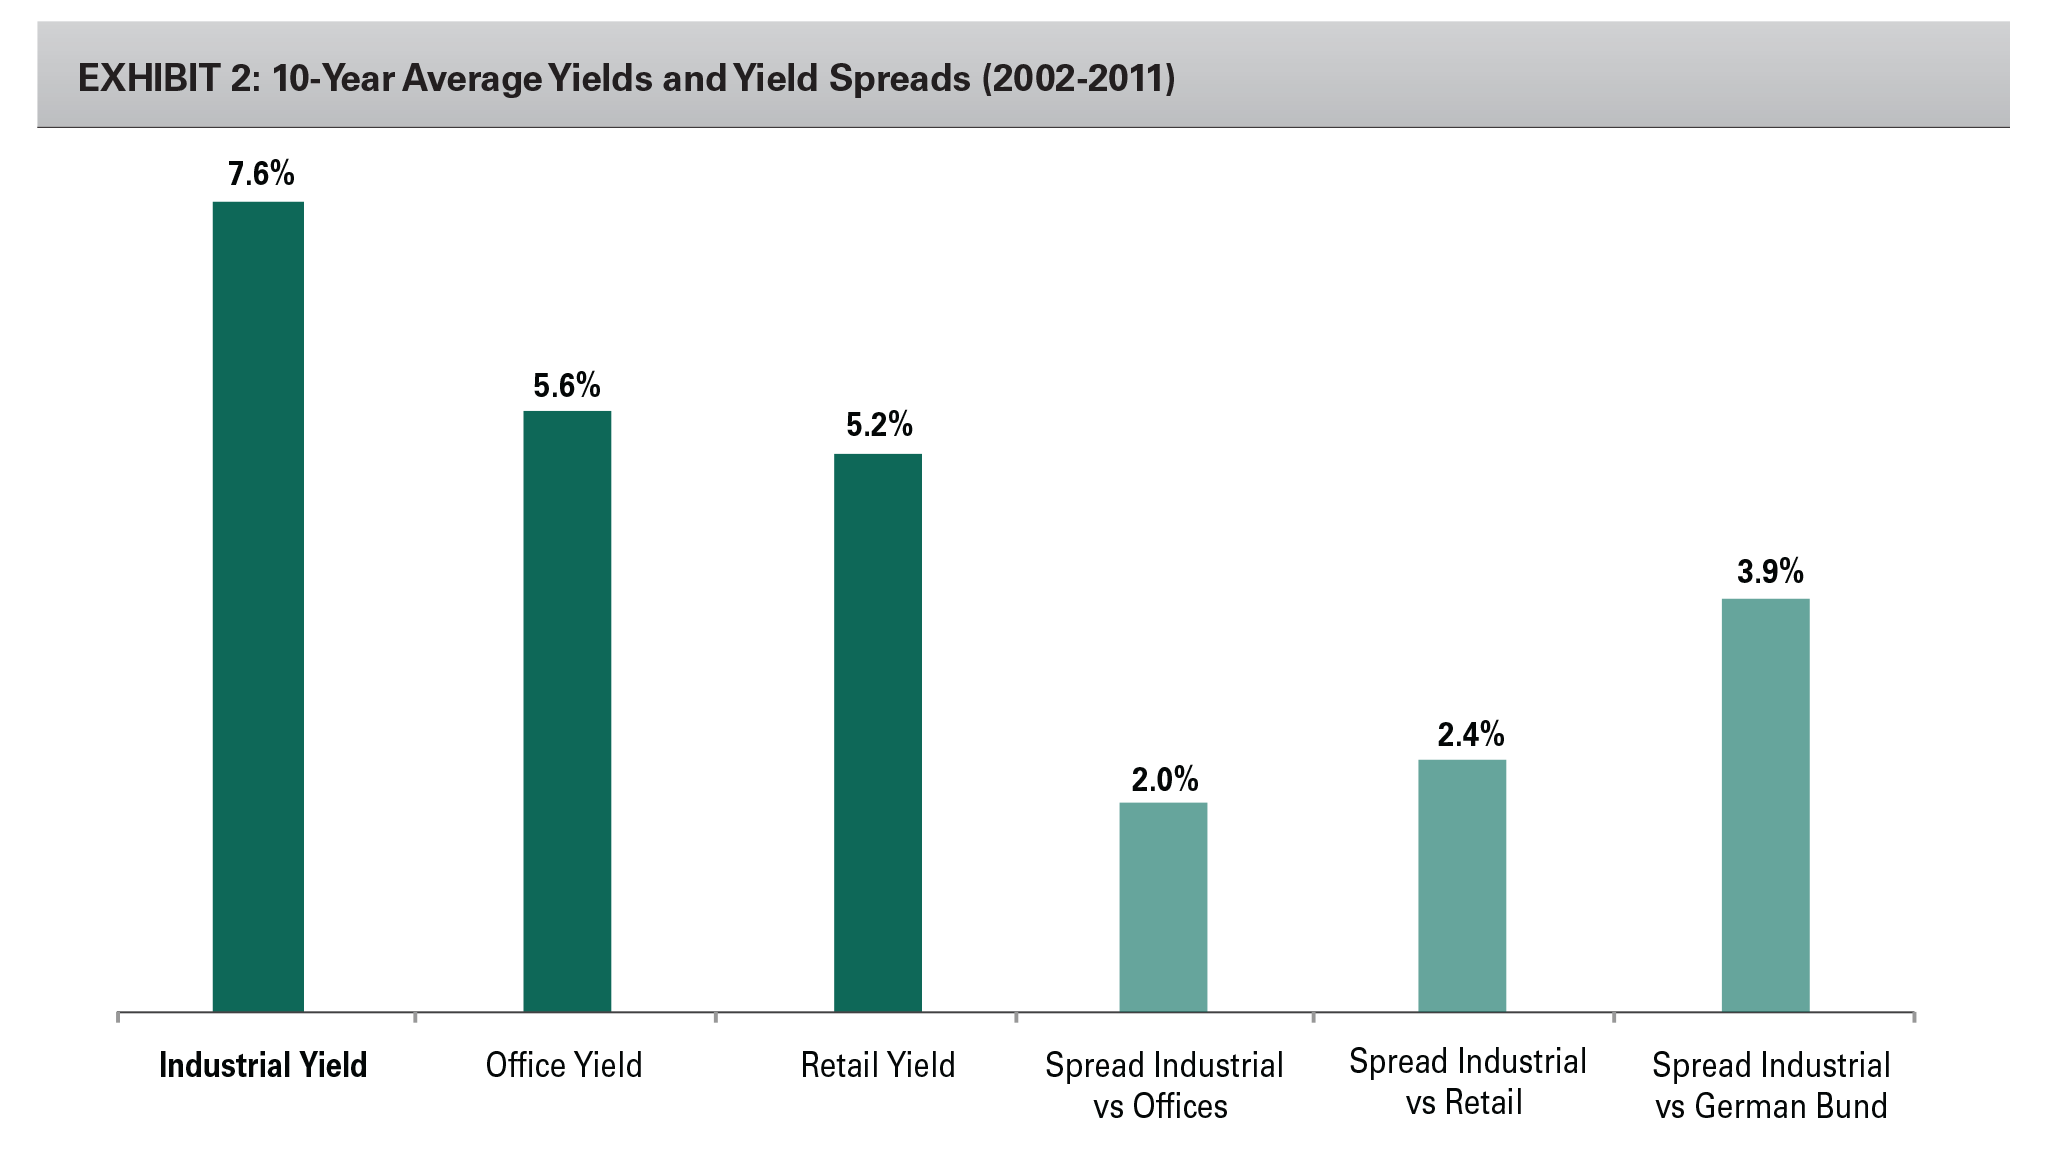 EXHIBIT 2: 10-Year Average Yields and Yield Spreads (2002-2011)